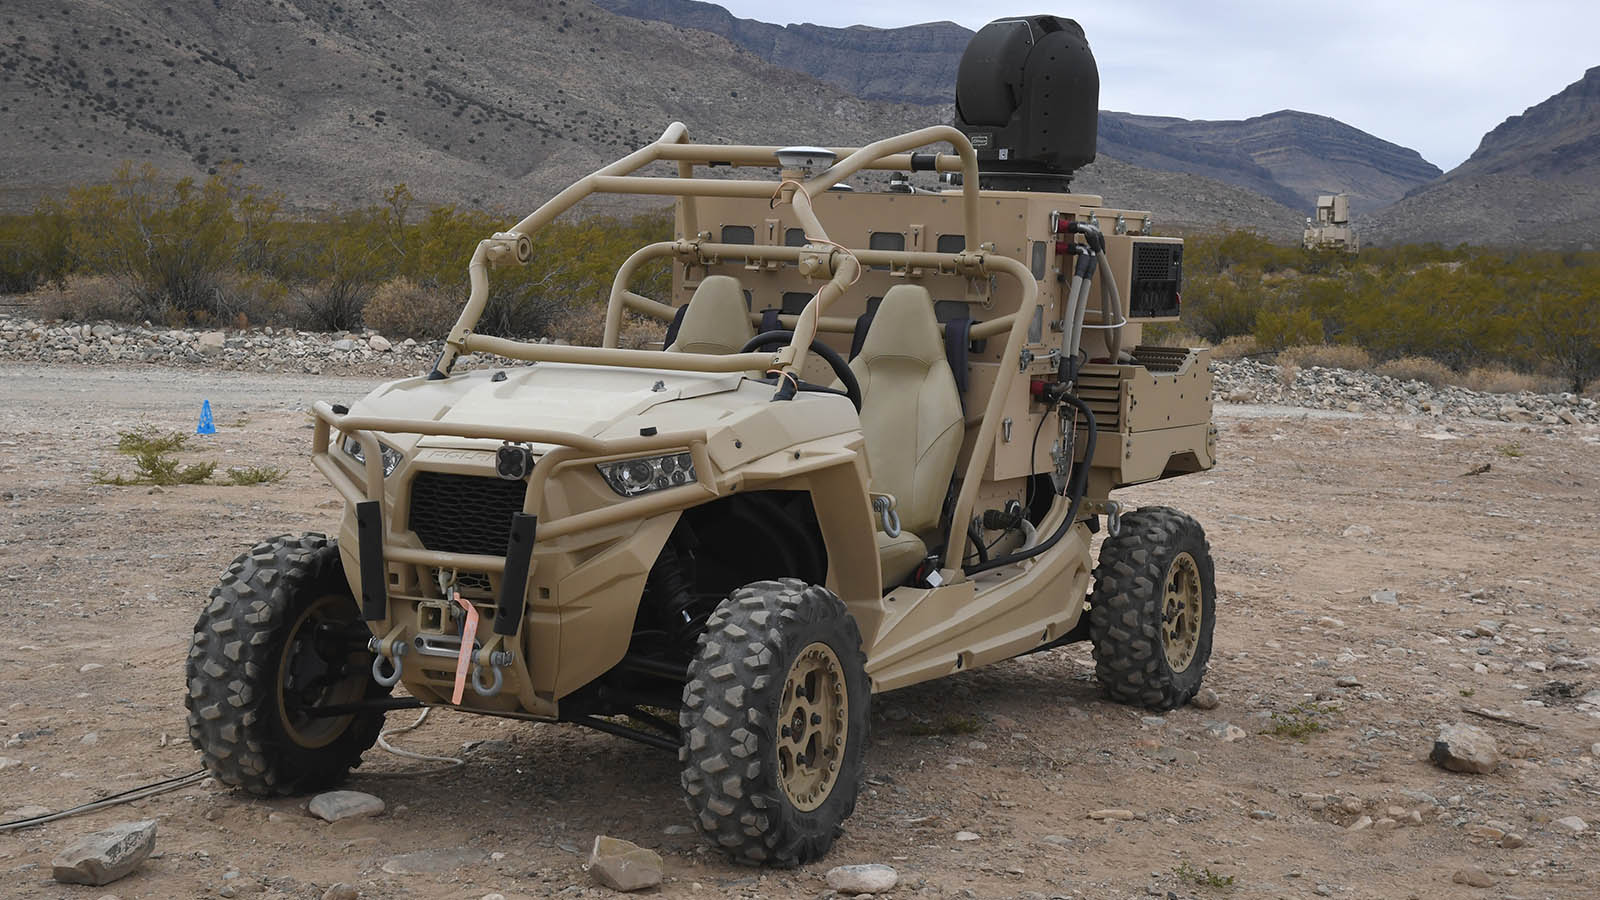 The High-Energy Laser Weapon System mounted on a tactical military vehicle at White Sands Missile Range.